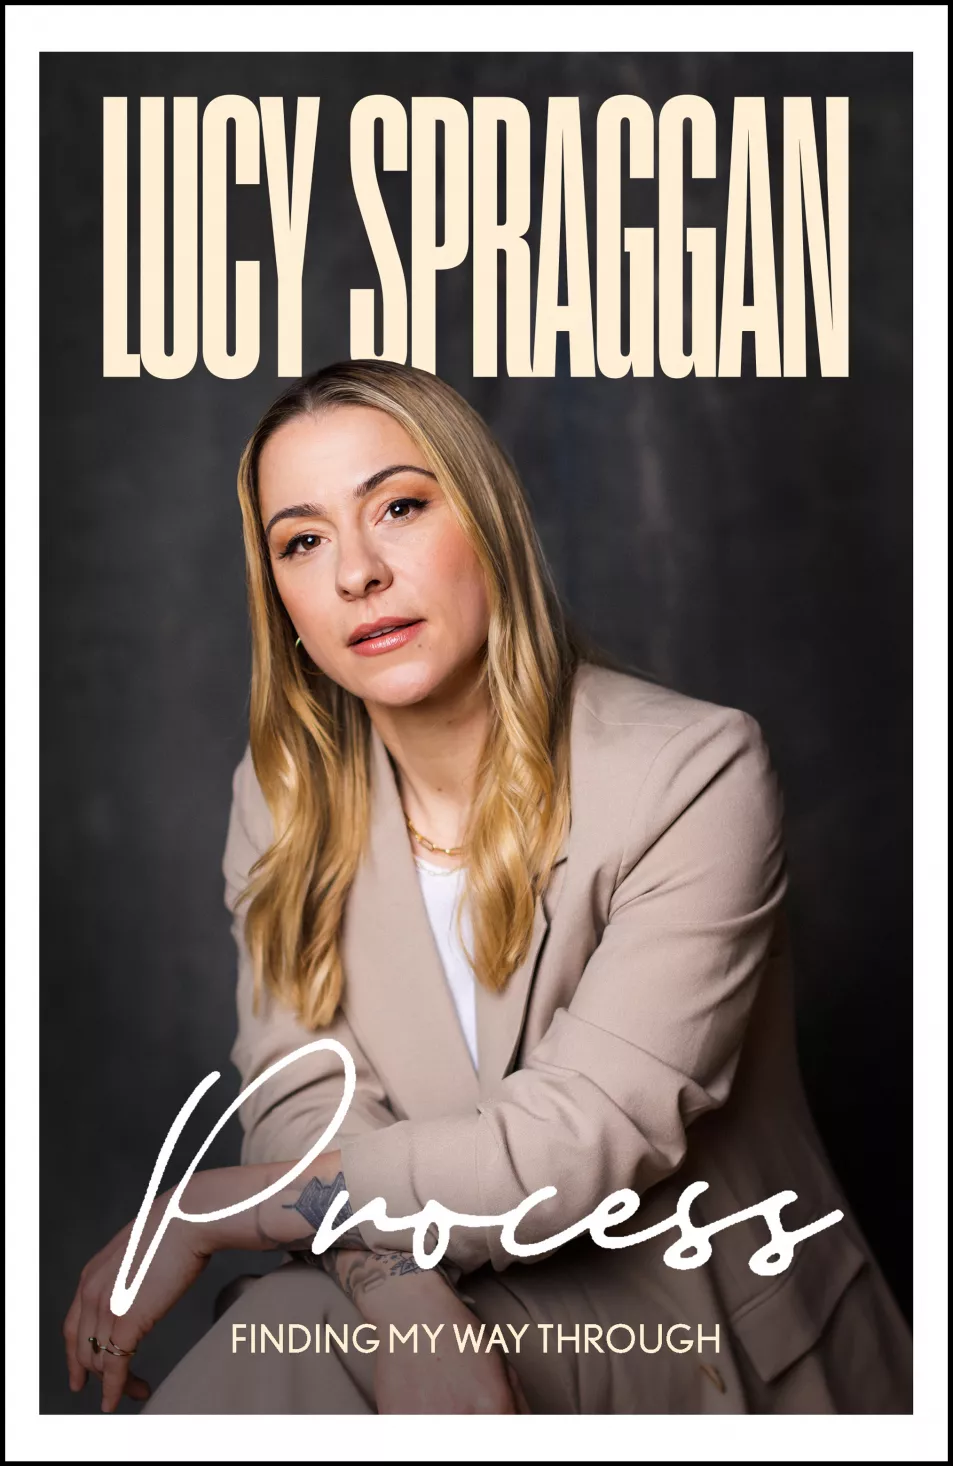 Book jacket of Process: Finding My Way Through by Lucy Spraggan (Blink/PA)